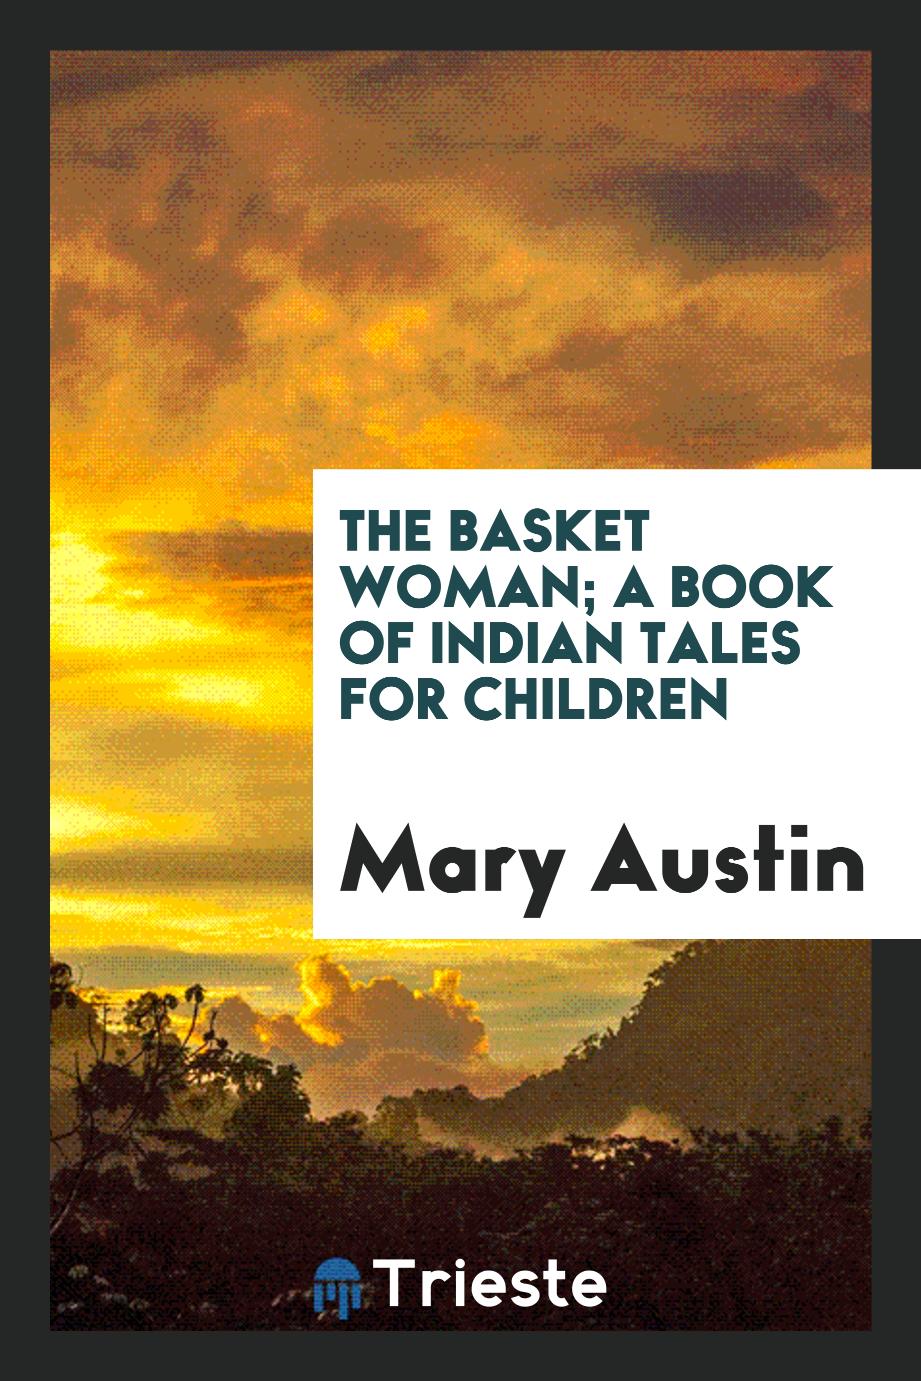 The basket woman; a book of Indian tales for children